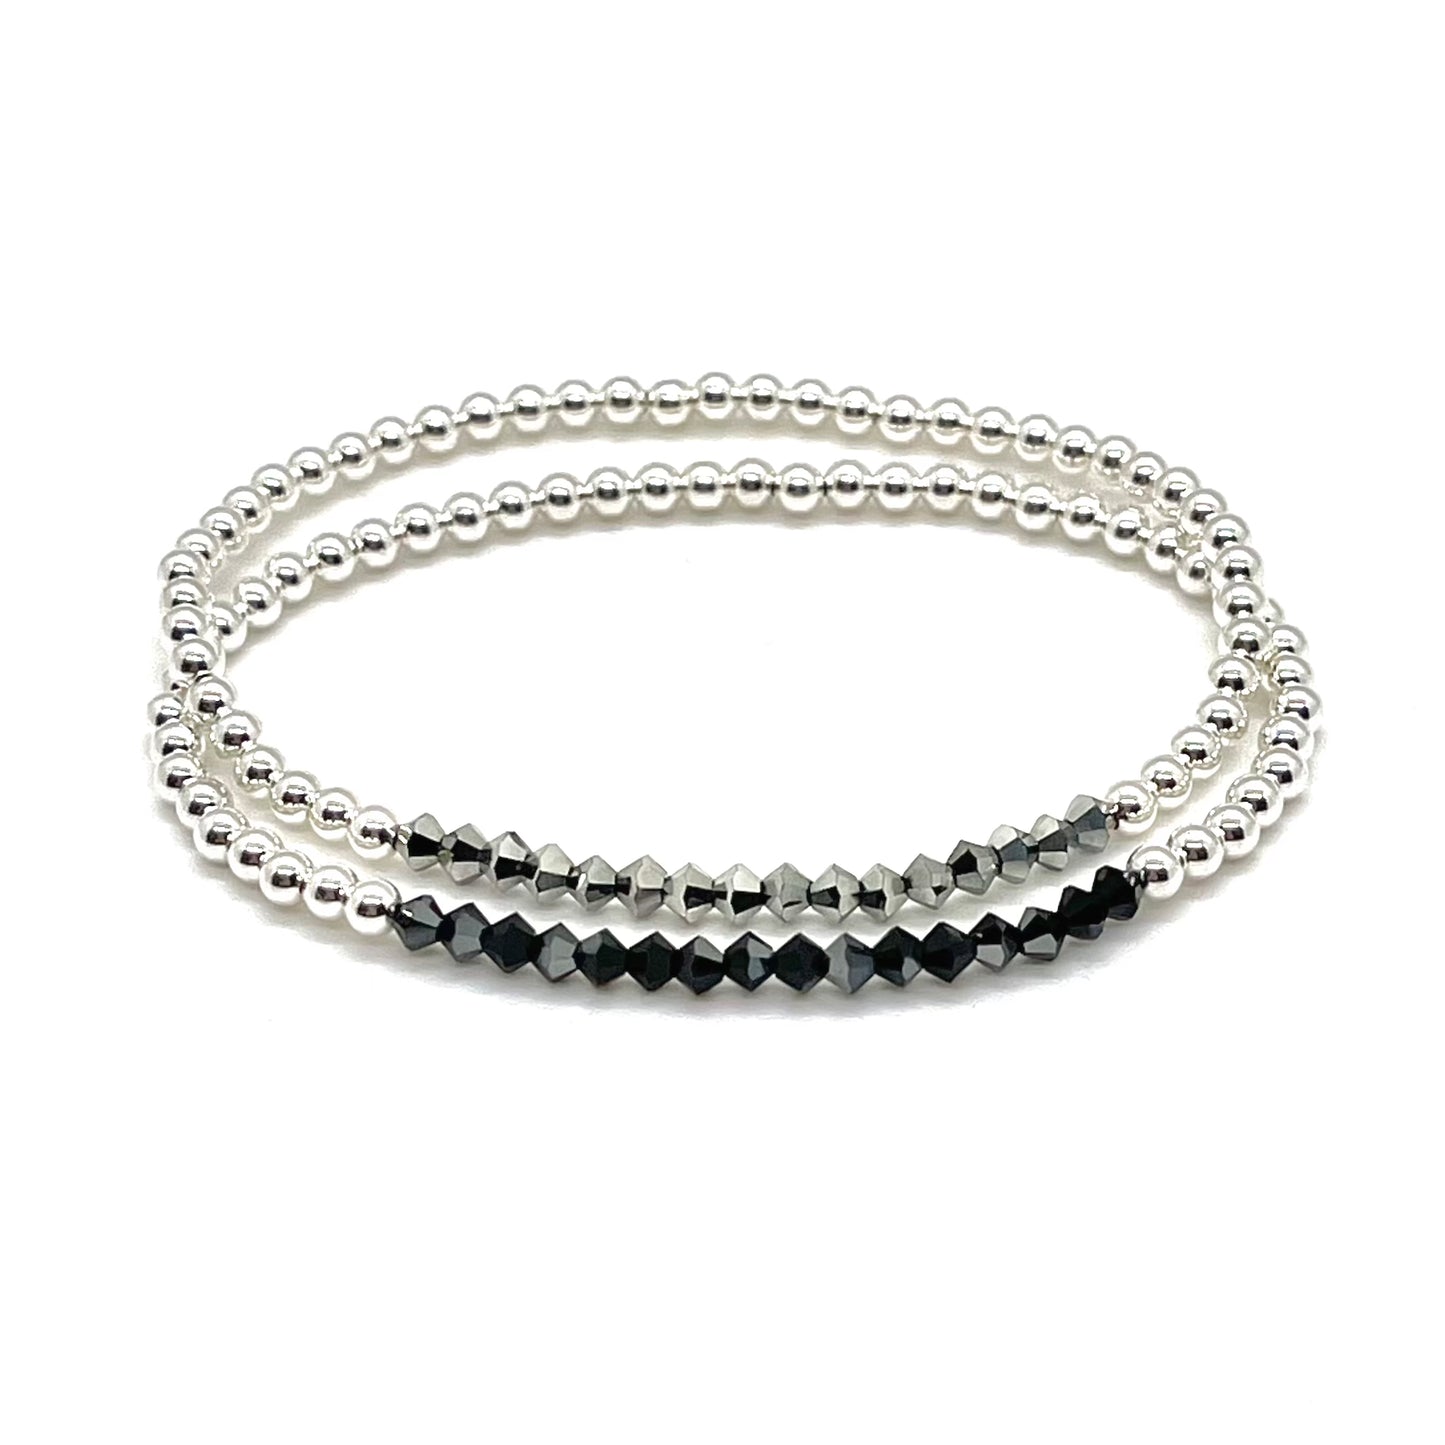 Black and hematite faceted crystal bracelets with sterling silver 3mm beads on stretch cord.